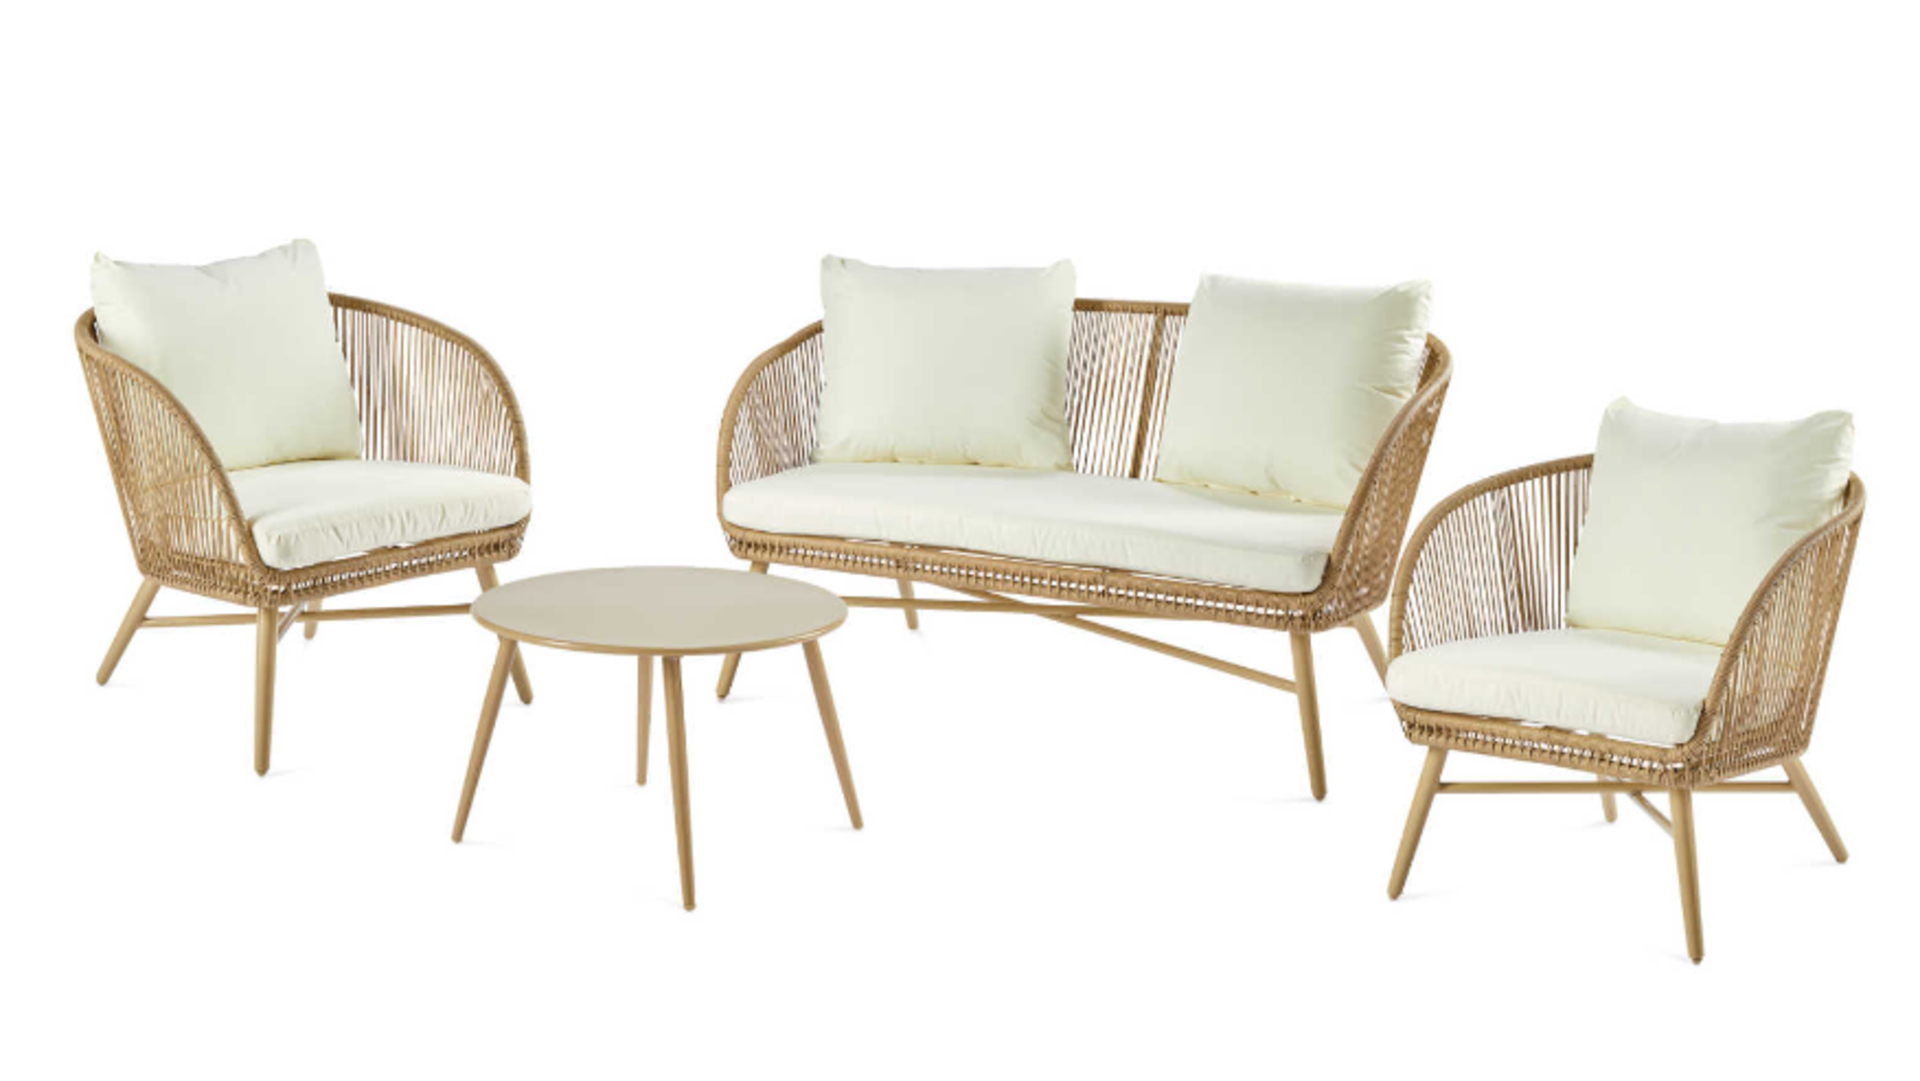 Rope Effect Furniture Set. Enjoy those lazy days in the garden with this comfortable and stylish - Image 2 of 5